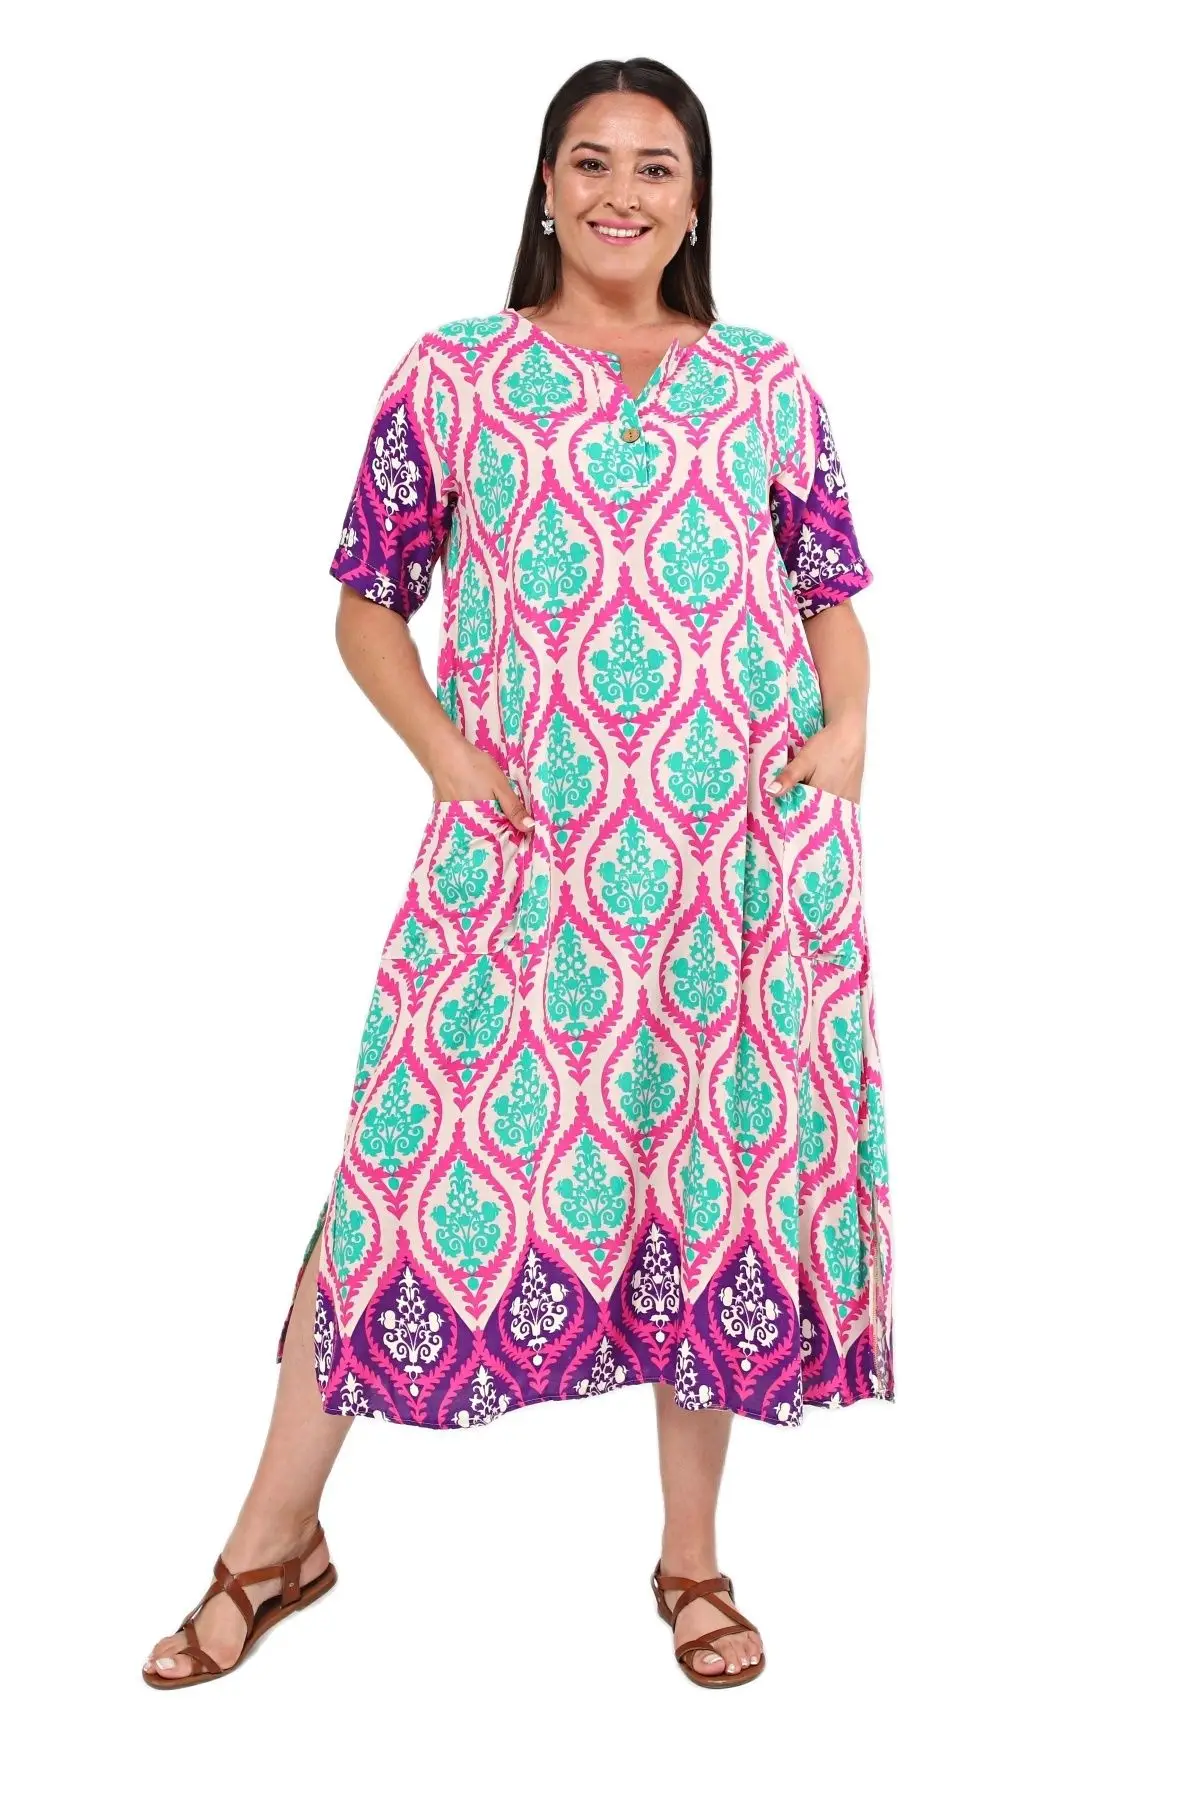 Women’s Plus Size Dress Colorful Ethnic Print Detail, Designed and Made in Turkey, New Arrival